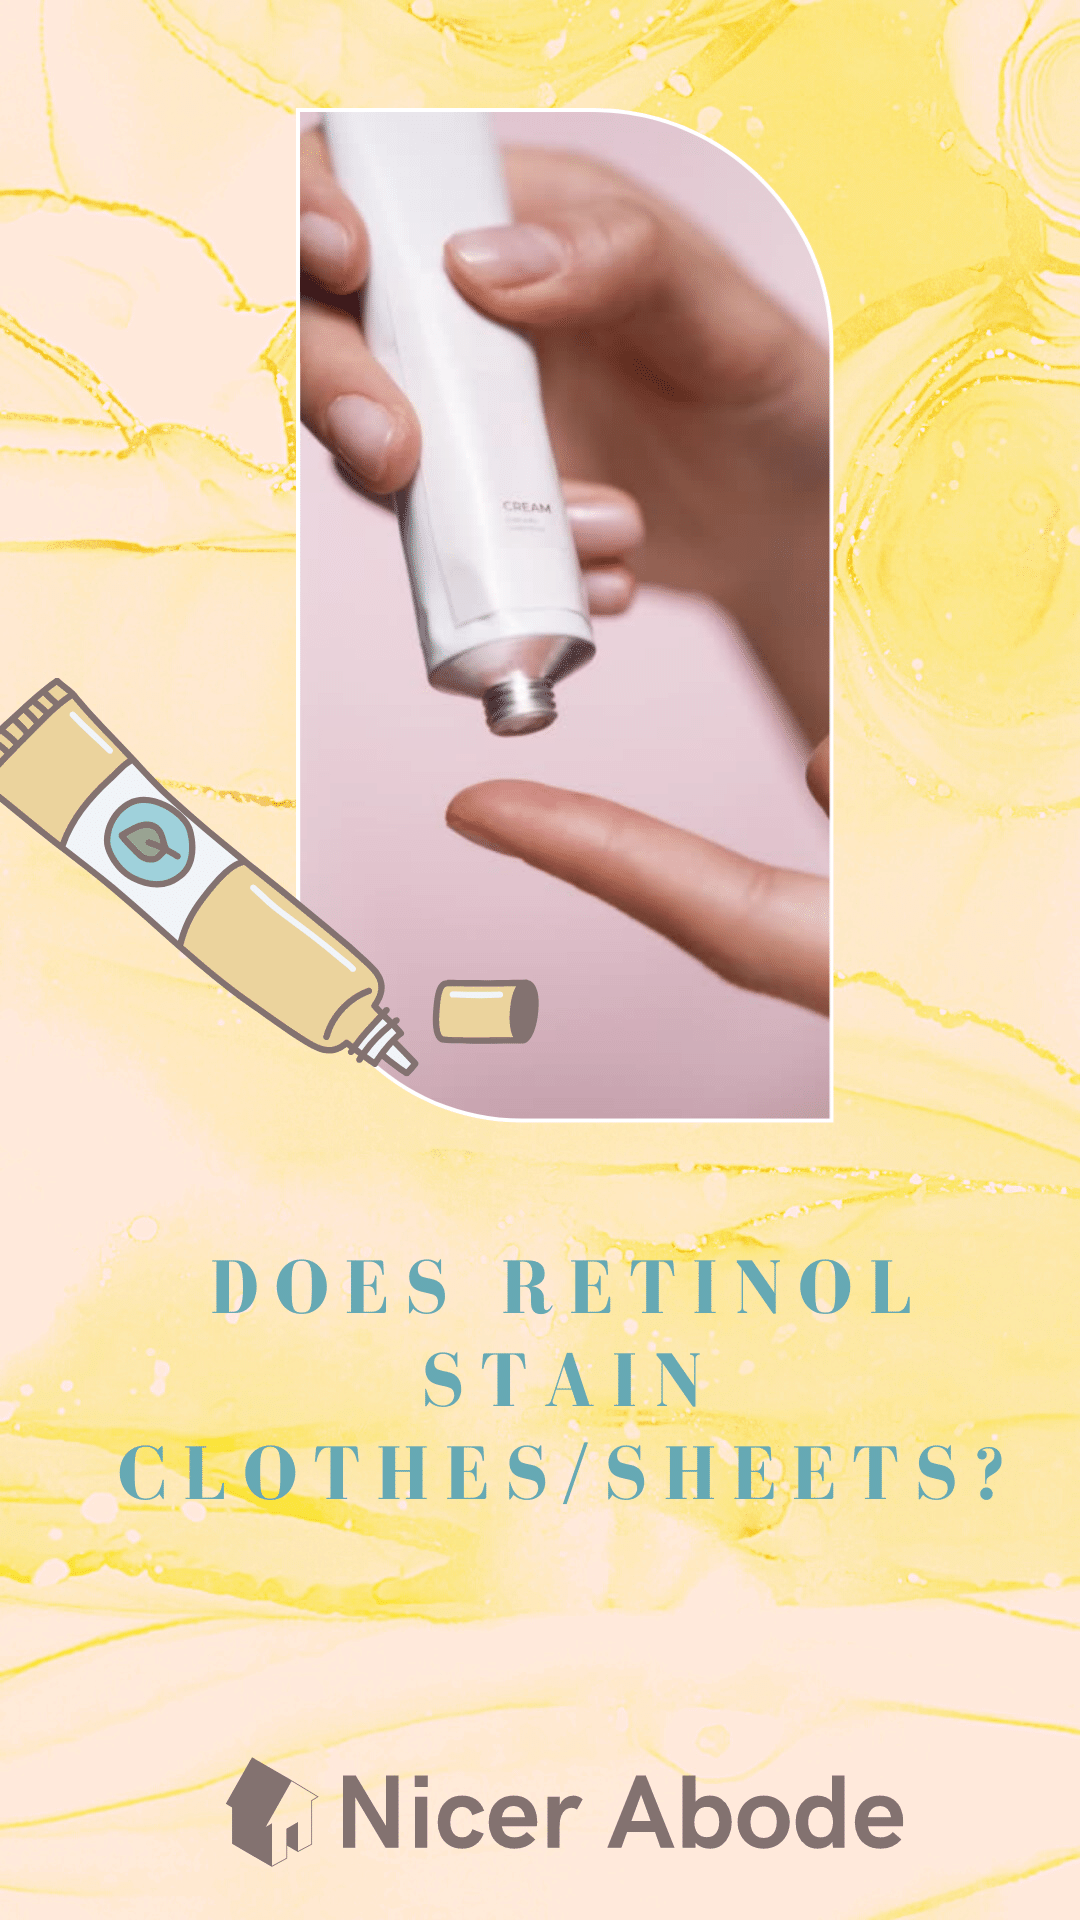 does-retinol-stain-sheets-or-clothes